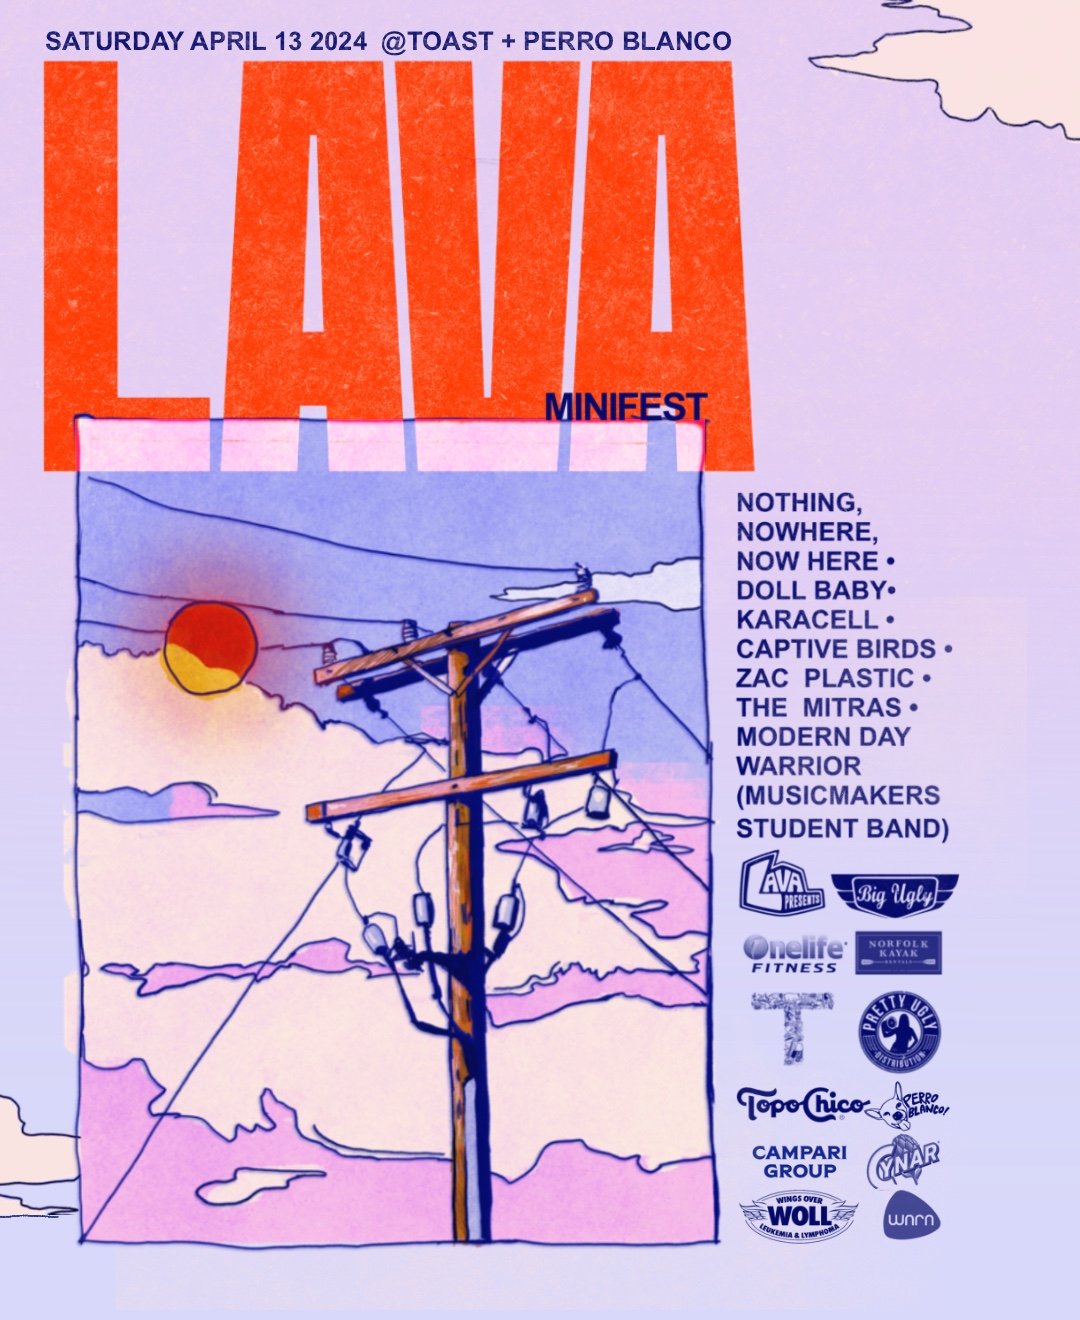 LAVA Mini Fest this Saturday in Norfolk Virginia with performances from Nothing, Nowhere, Now, Here, Doll Baby, Karacell, Captive Birds and more